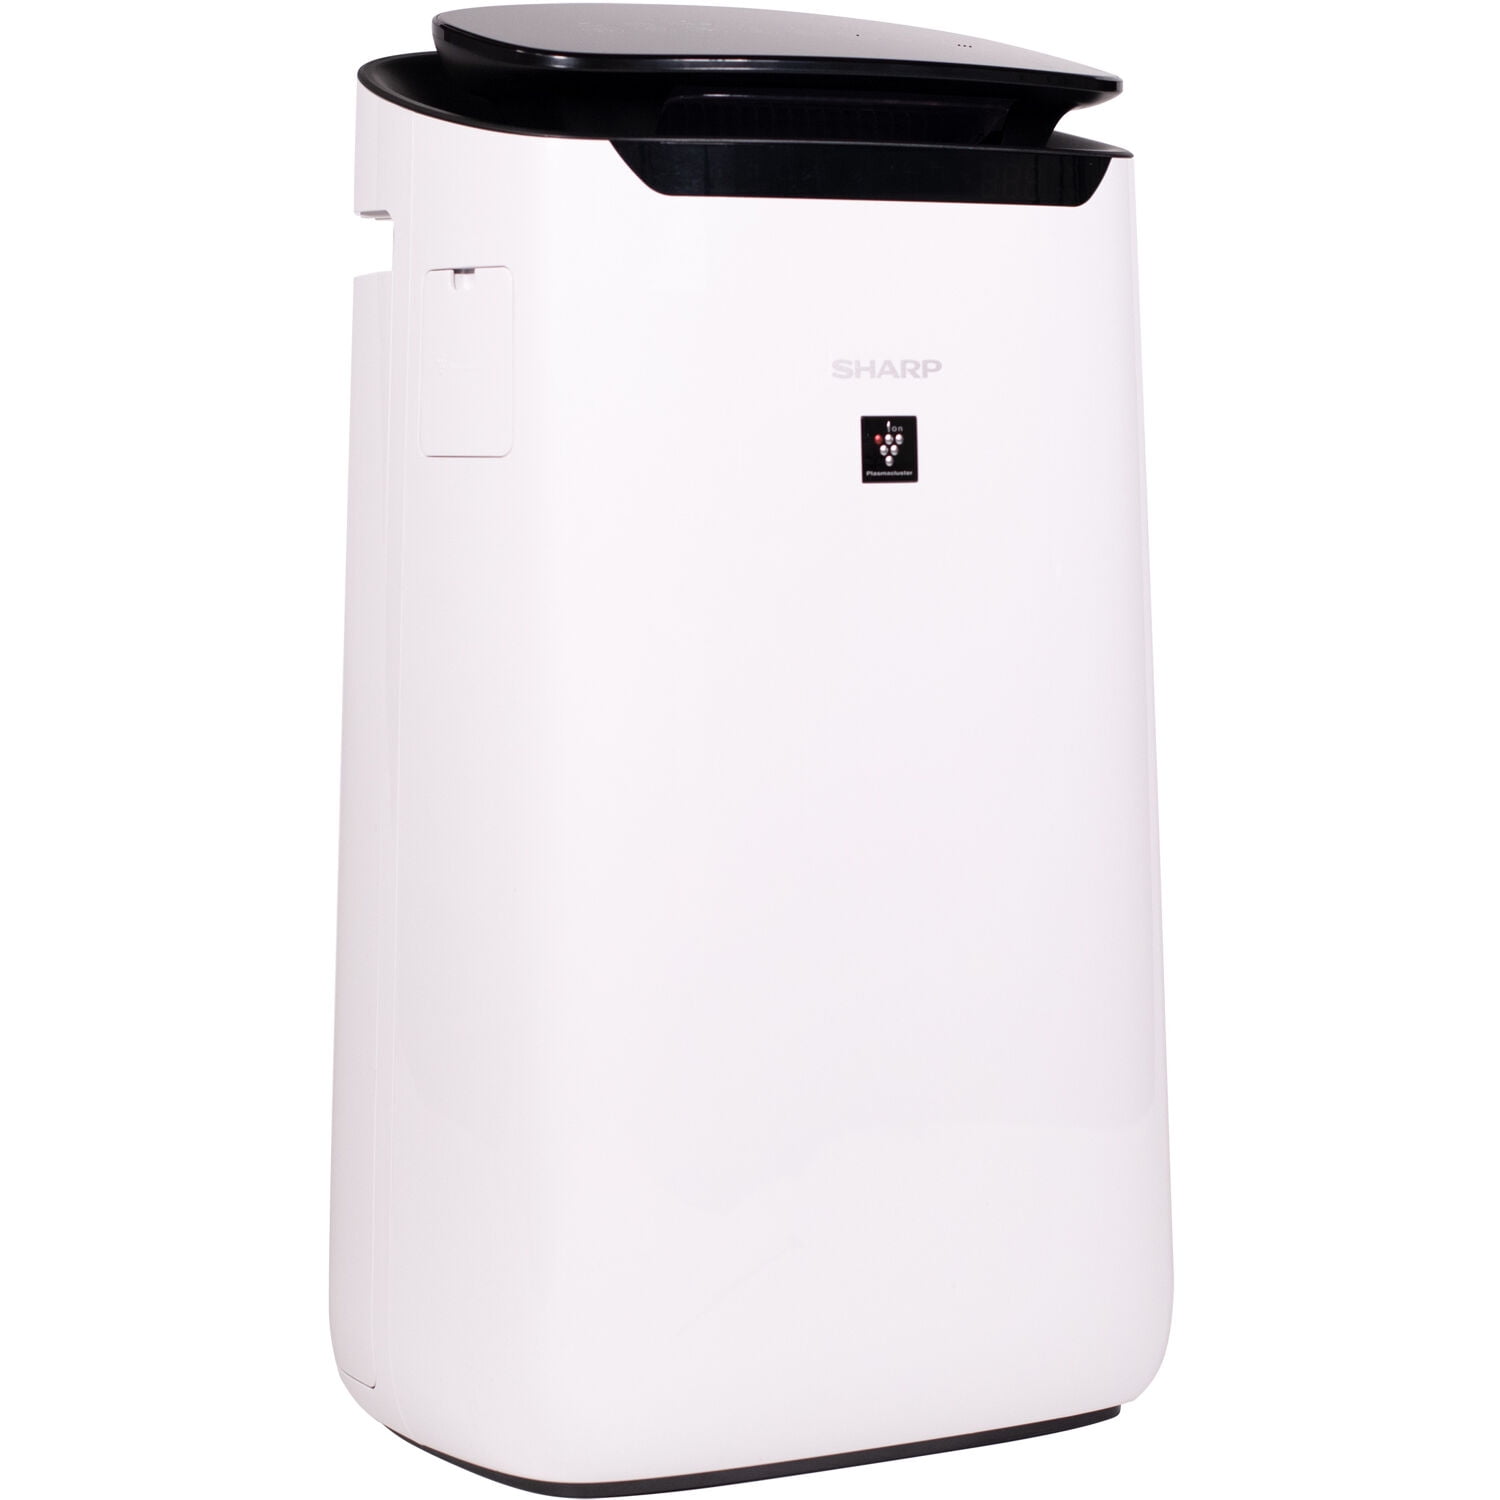 Sharp Plasmacluster Ion Air Purifier with True HEPA Filter, Rooms up to 520  Sq ft, White, FXJ80UW